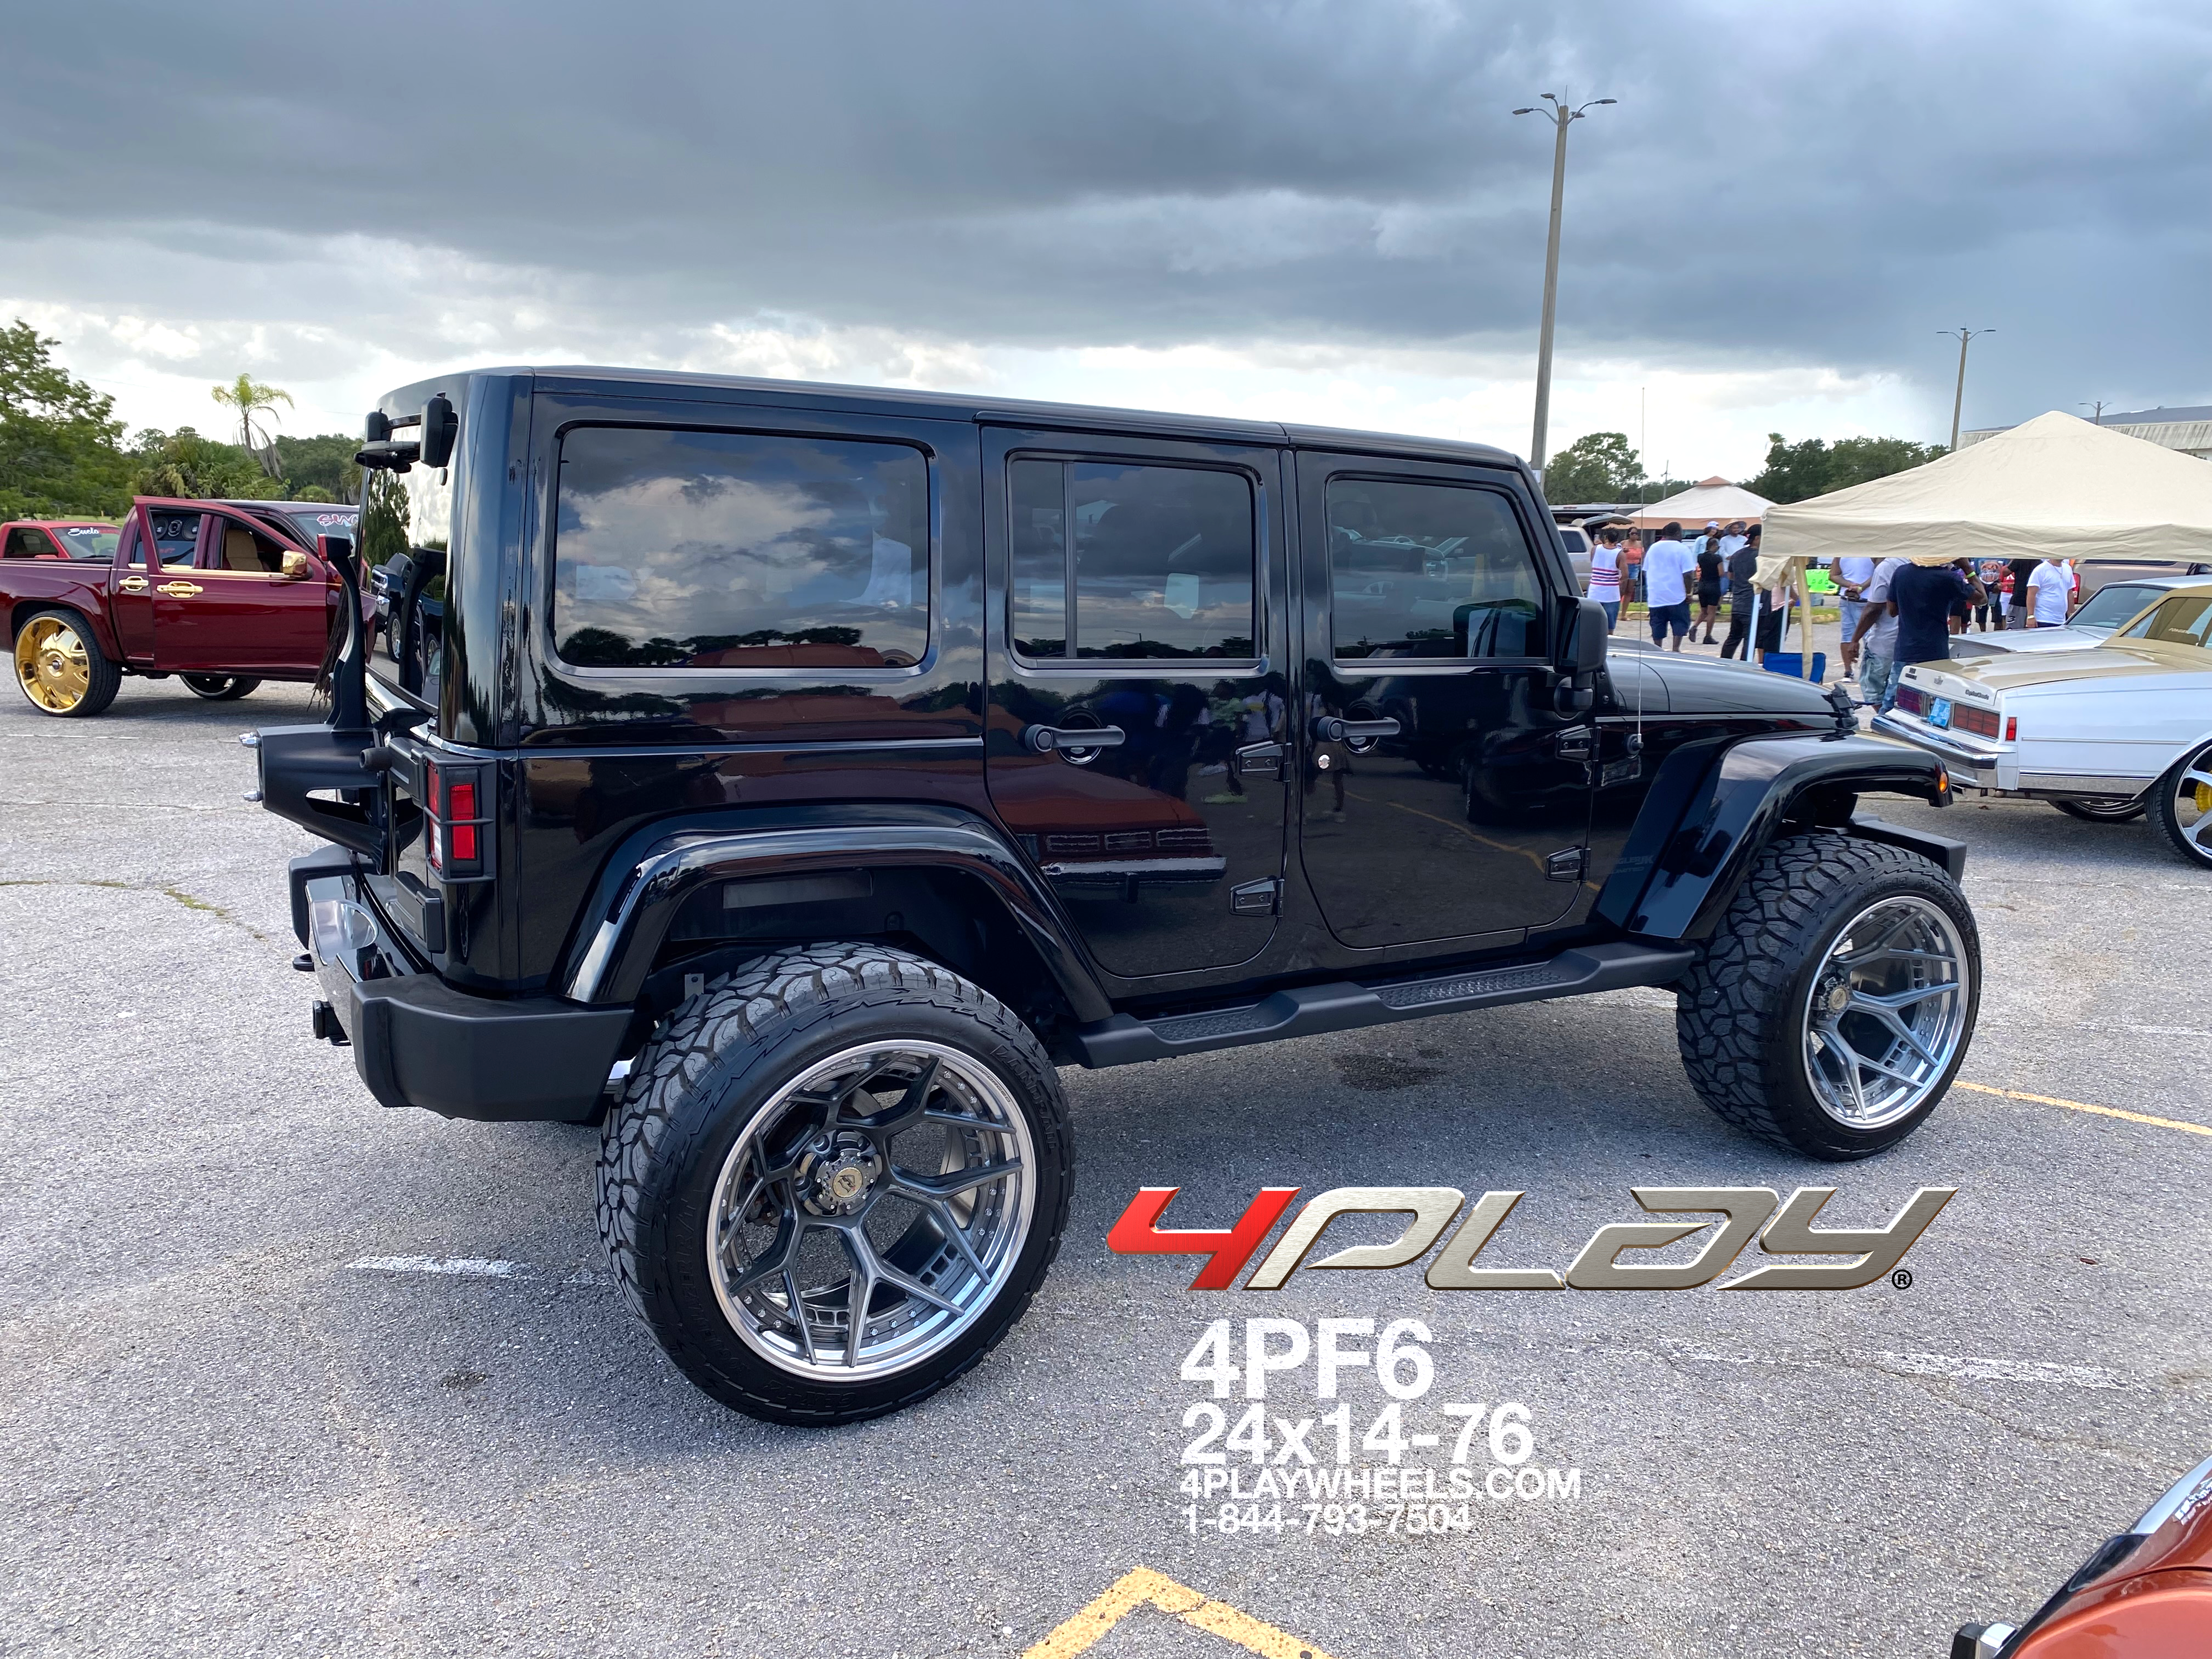 Jeep Wrangler with 24×14 Wheels 4PF6 Forged